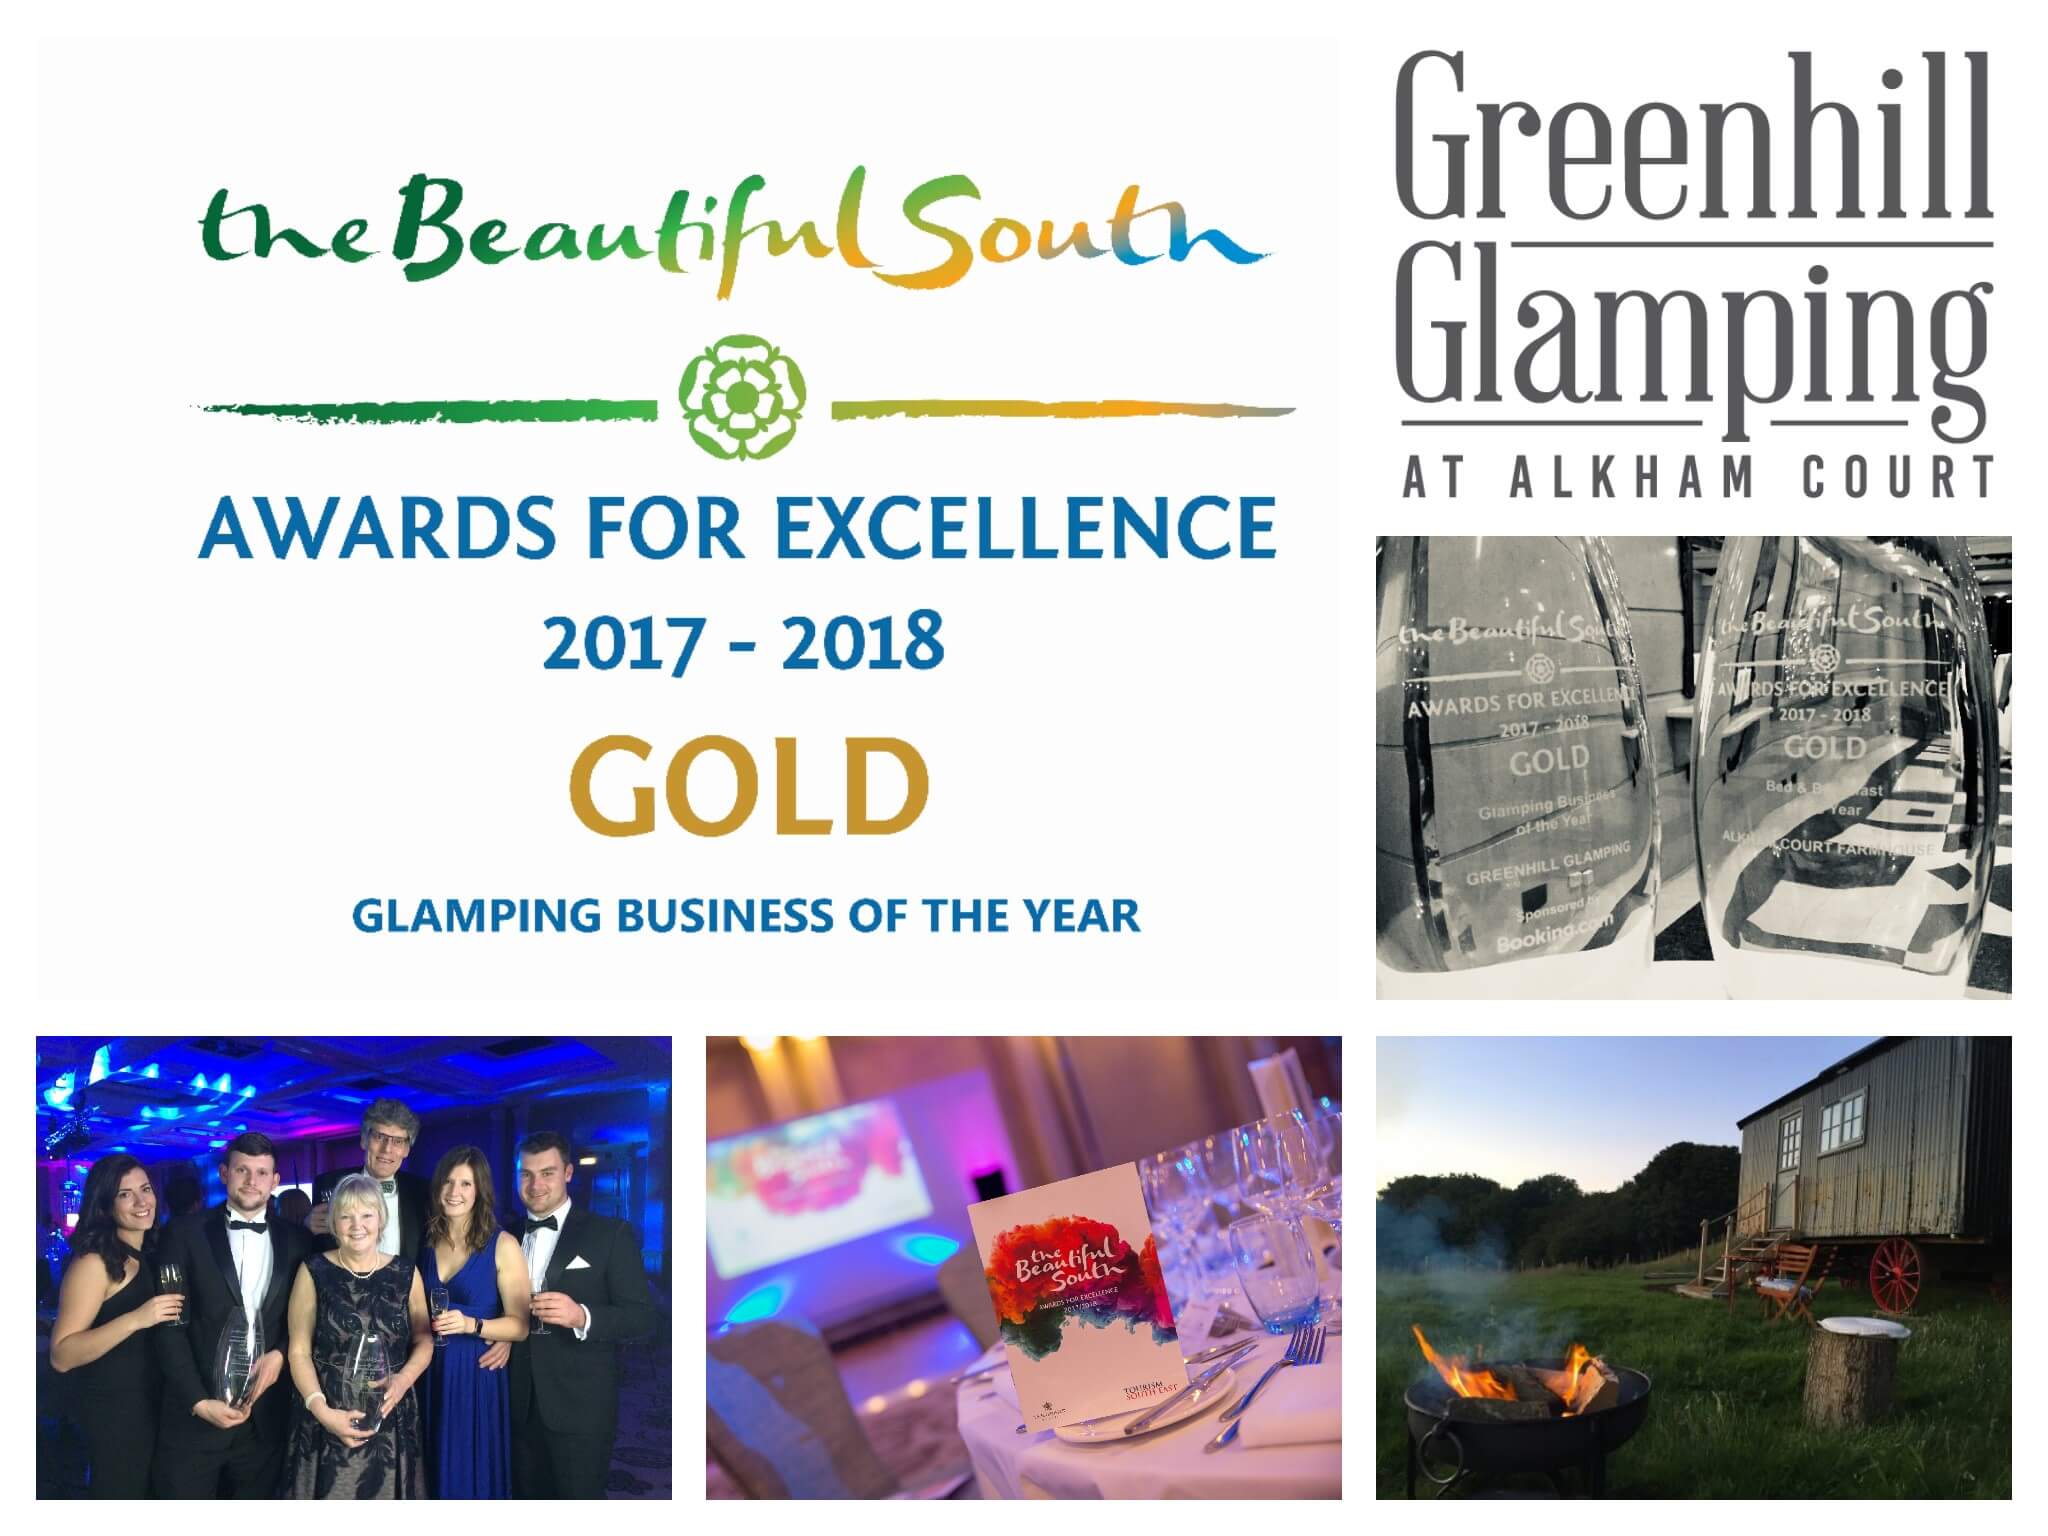 Greenhill Glamping awards for excellence Gold